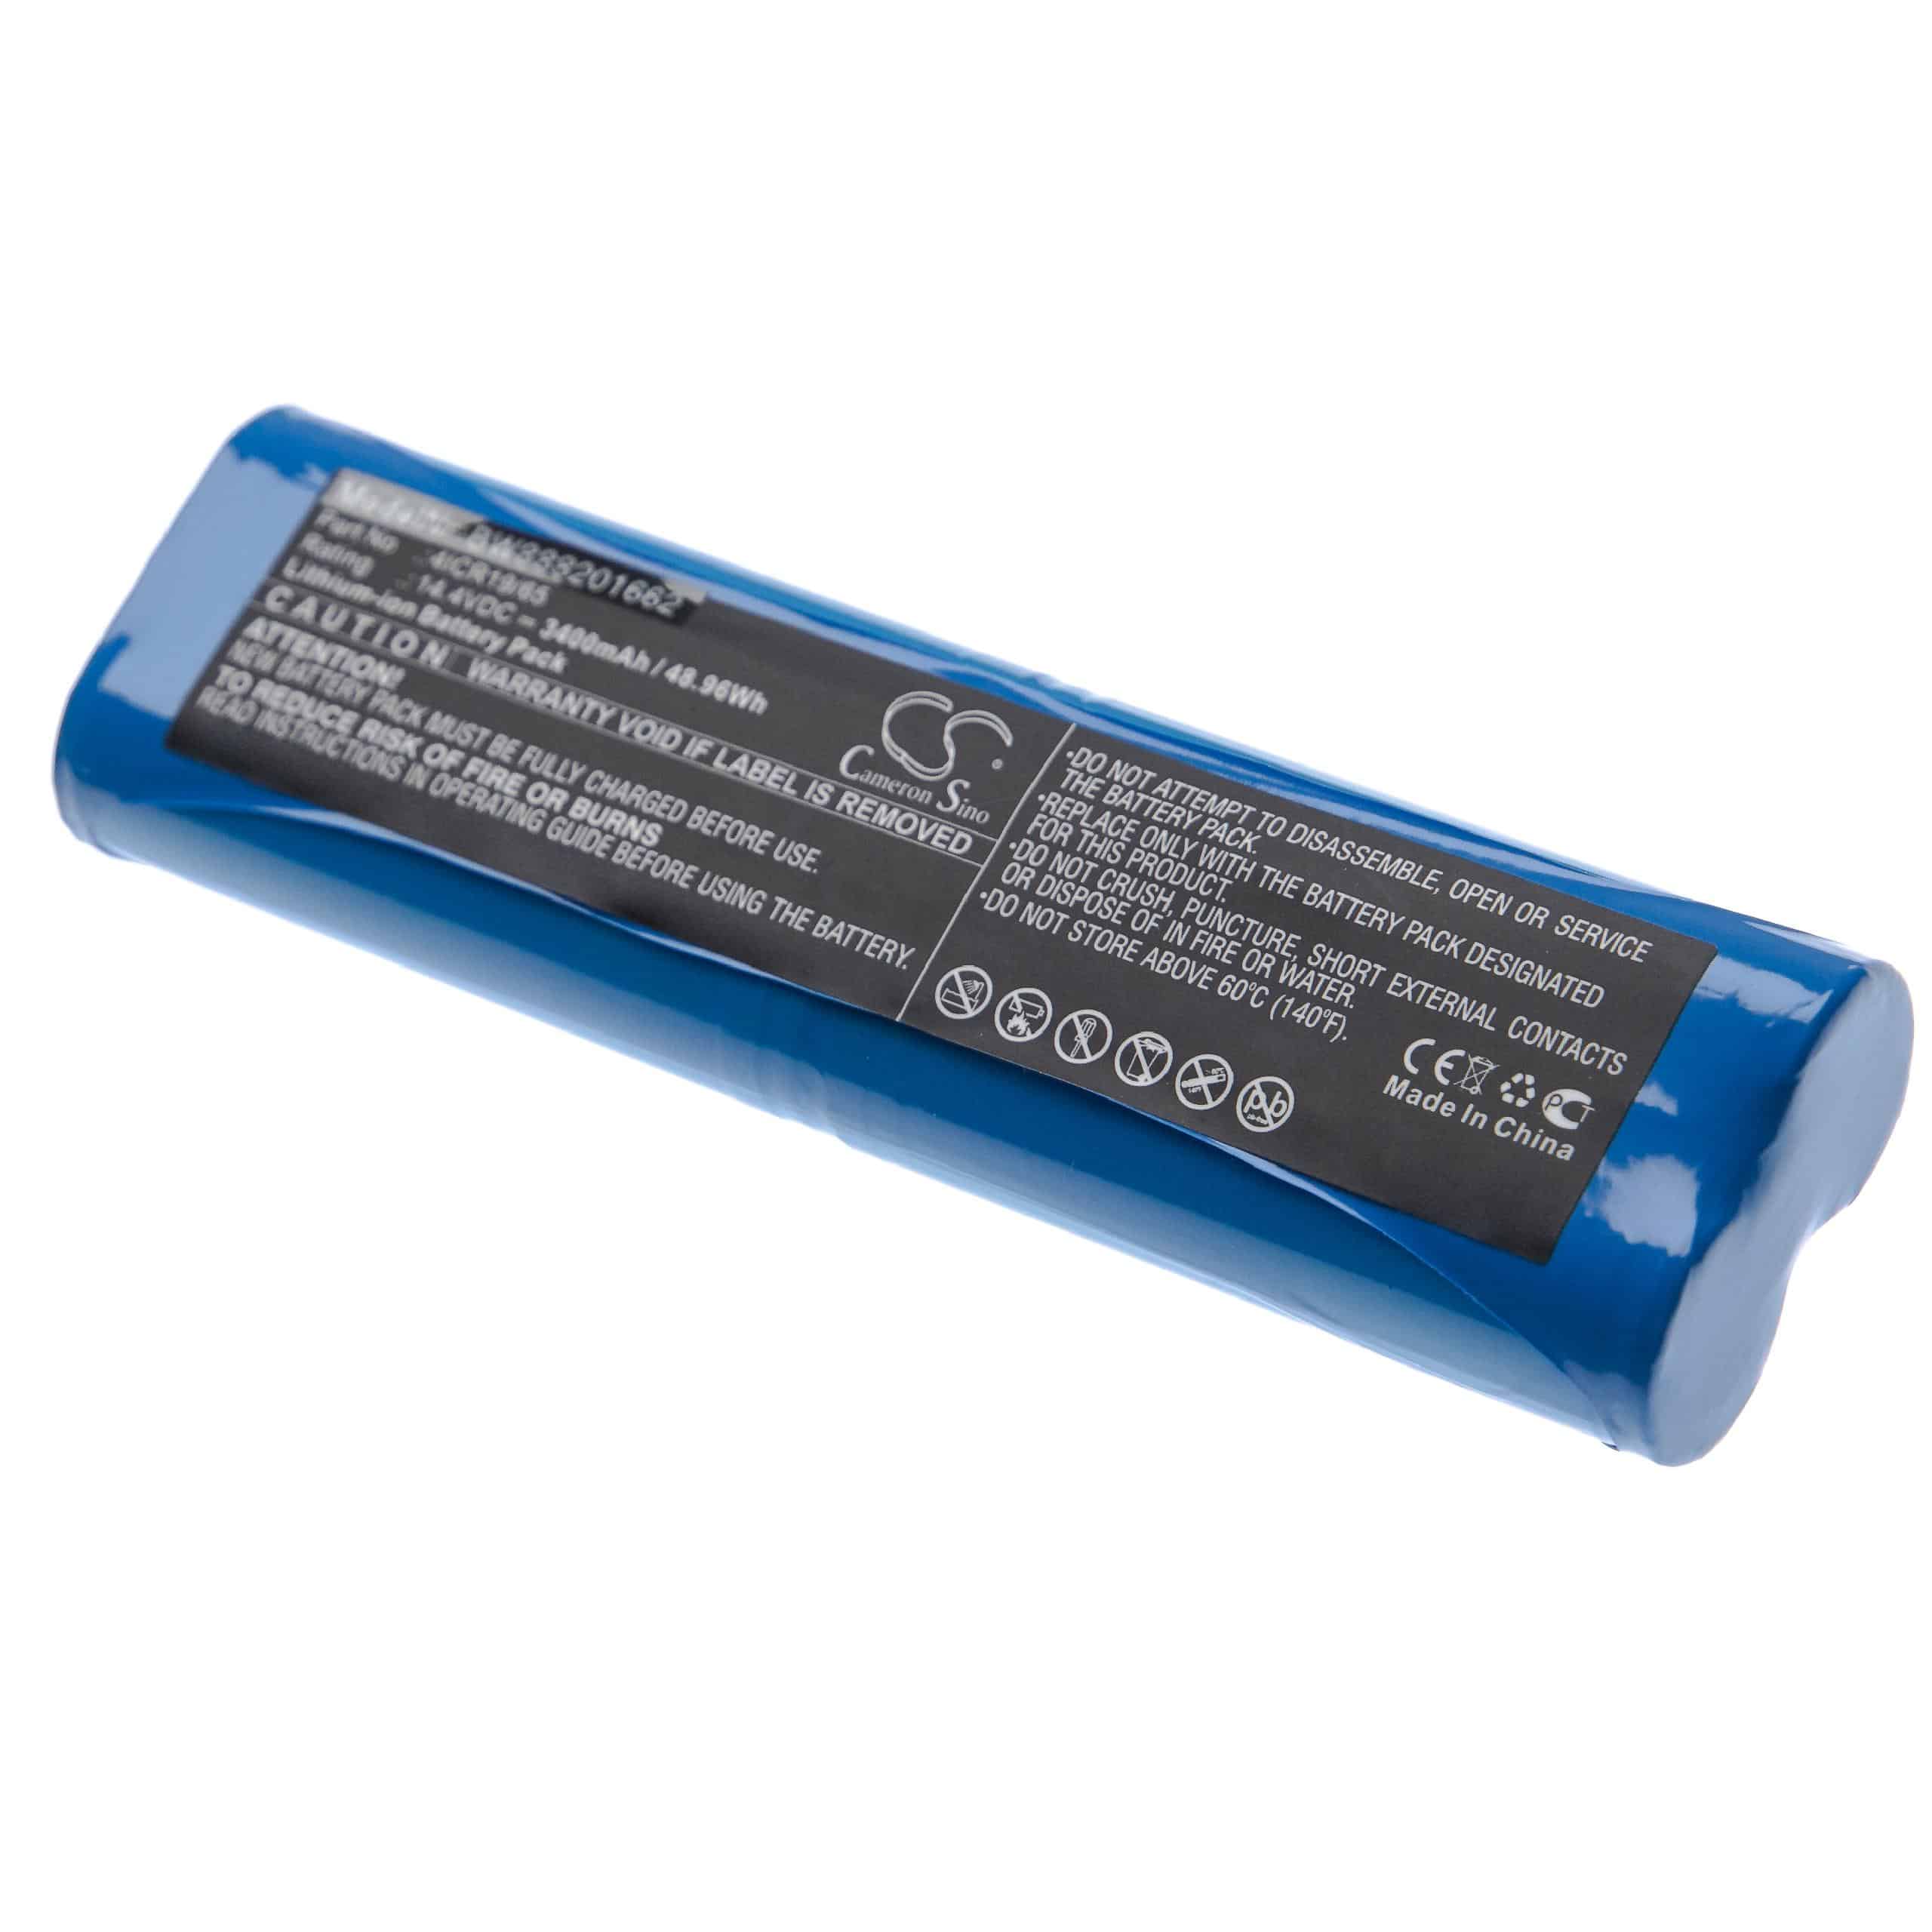 Battery Replacement for Bissell 4ICR19/65 for - 3400mAh, 14.4V, Li-Ion